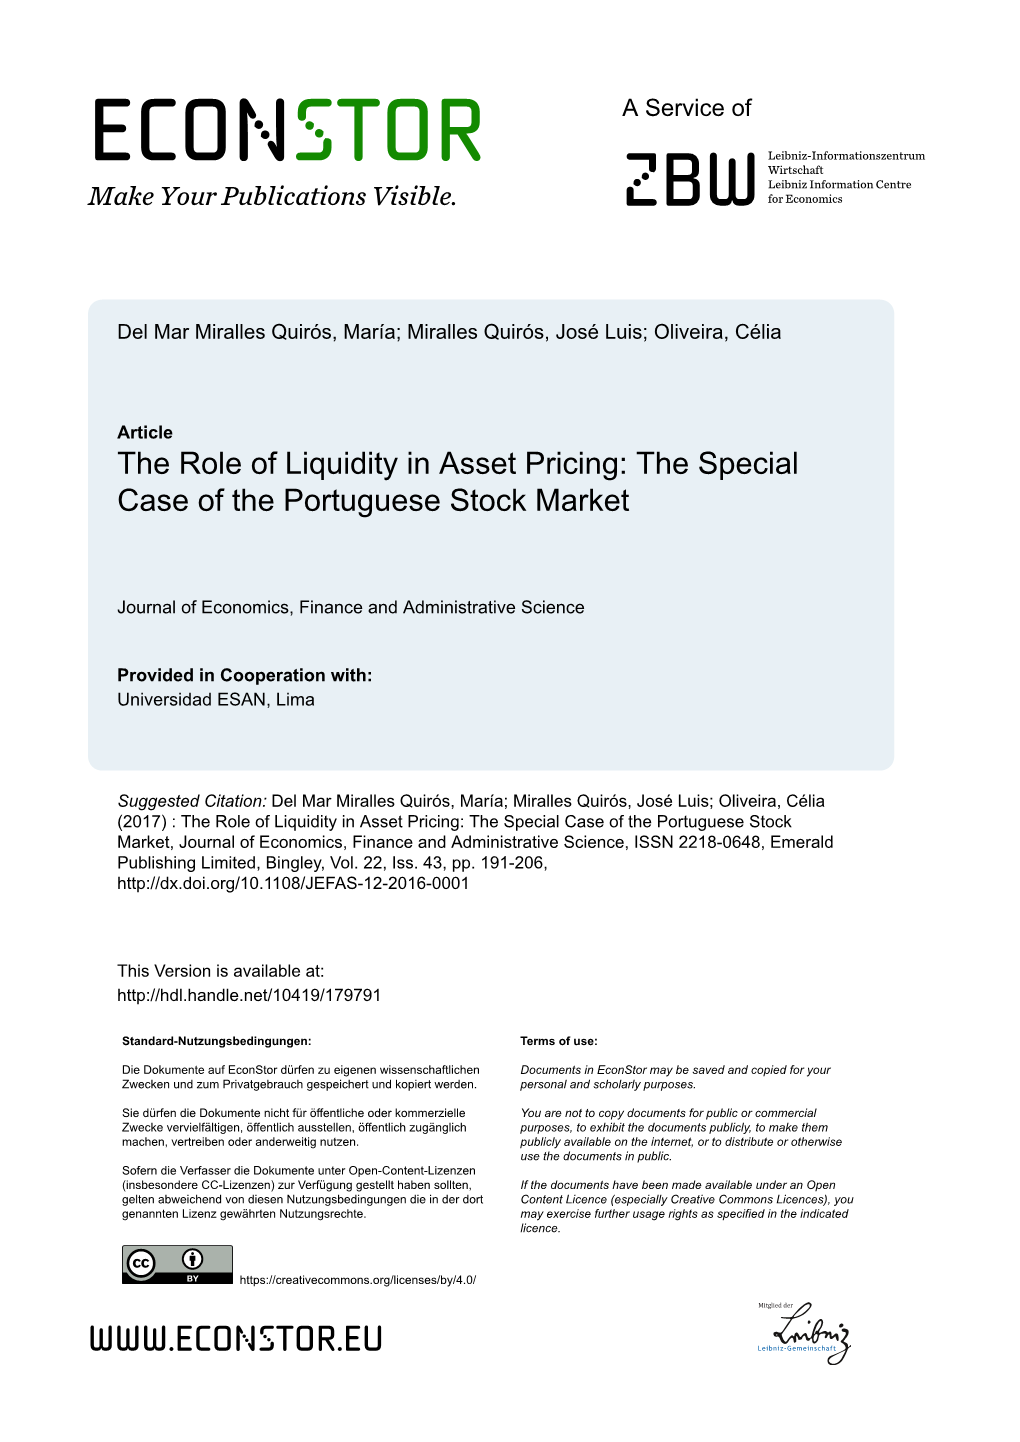 The Role of Liquidity in Asset Pricing: the Special Case of the Portuguese Stock Market